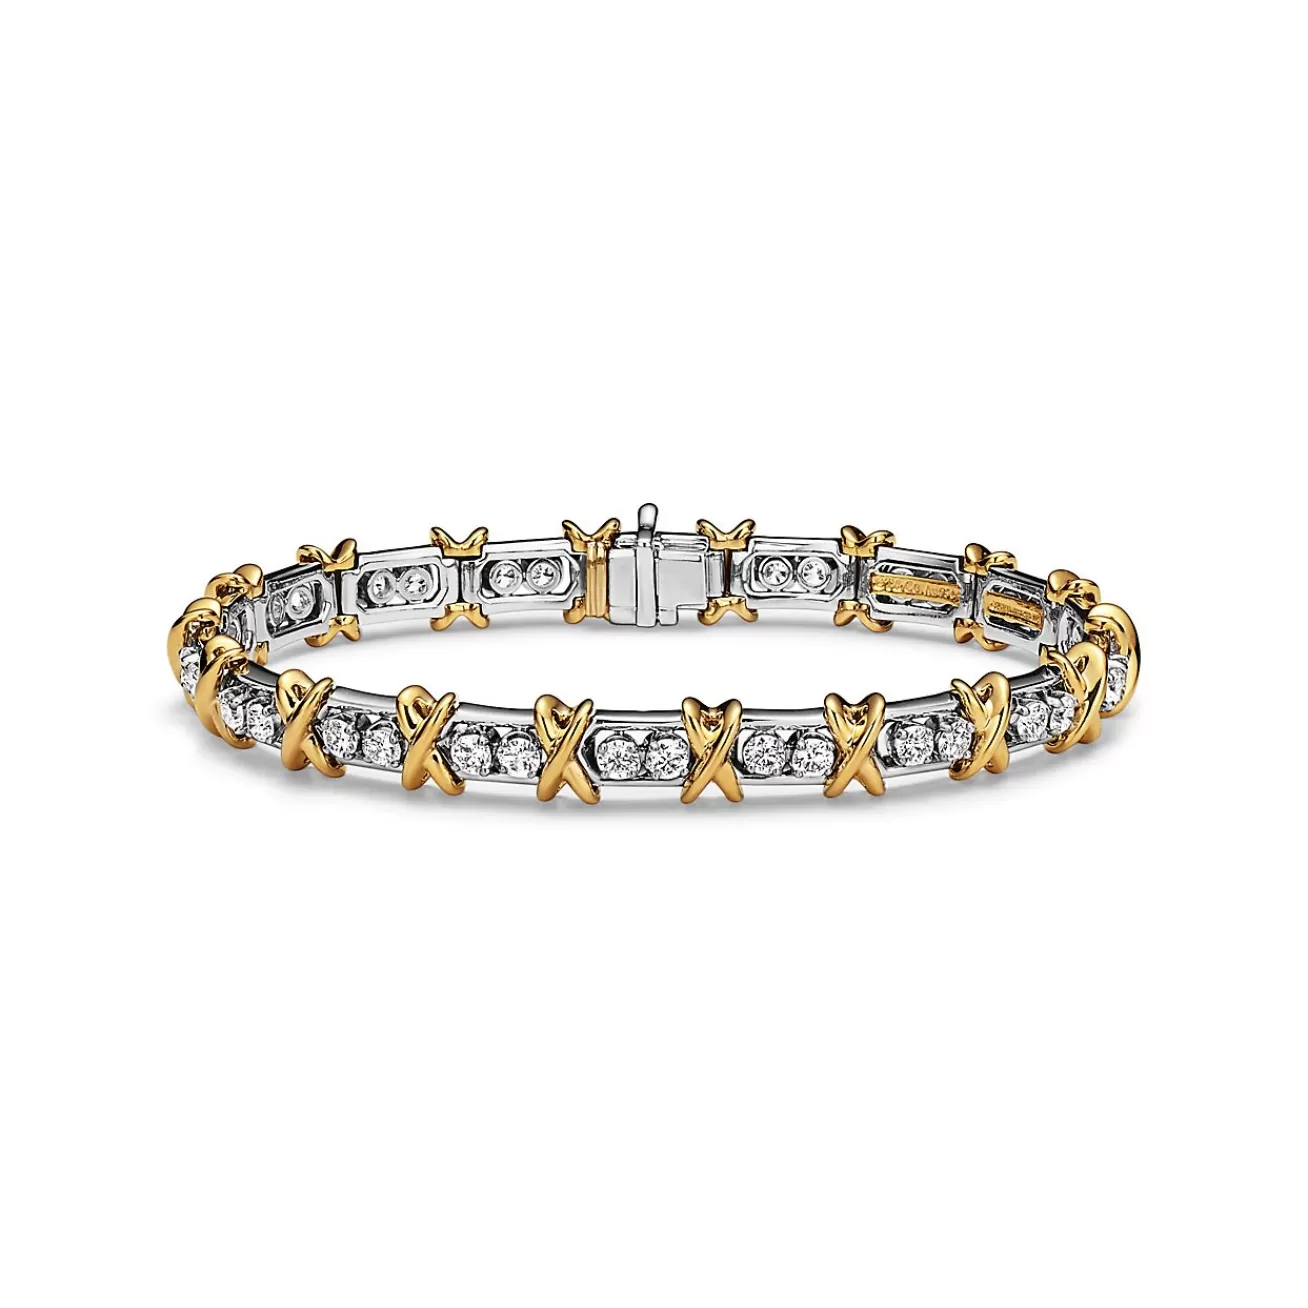 Tiffany & Co. Schlumberger® 36 Stone bracelet in 18k gold with diamonds. | ^ Bracelets | Gifts for Her